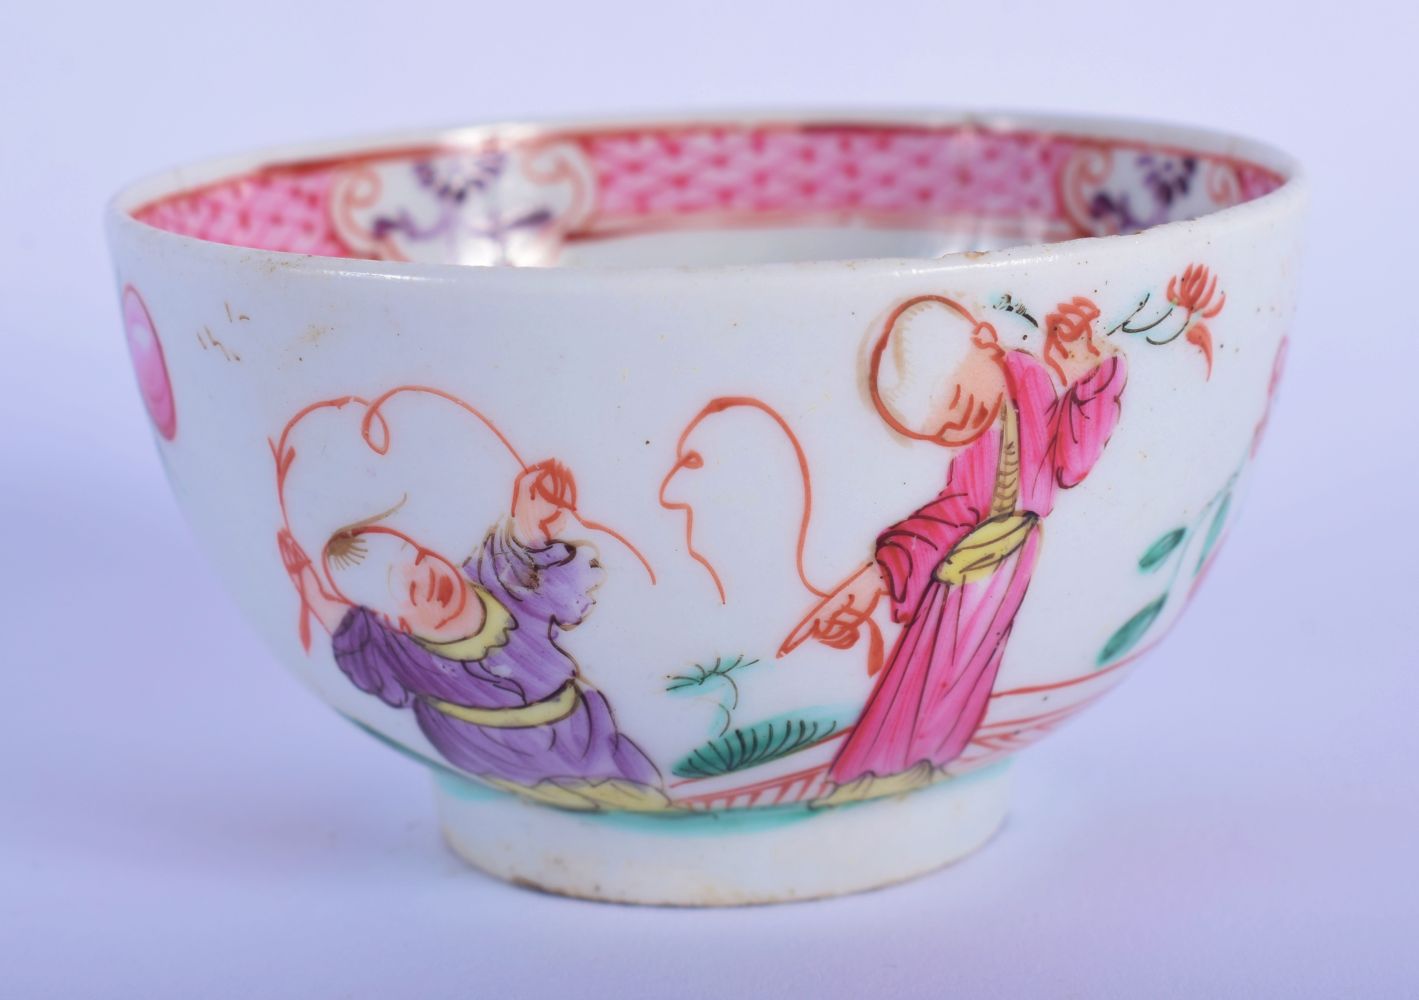 AN 18TH CENTURY ENGLISH PORCELAIN TEABOWL painted with figures in landscapes. 7.5 cm diameter.